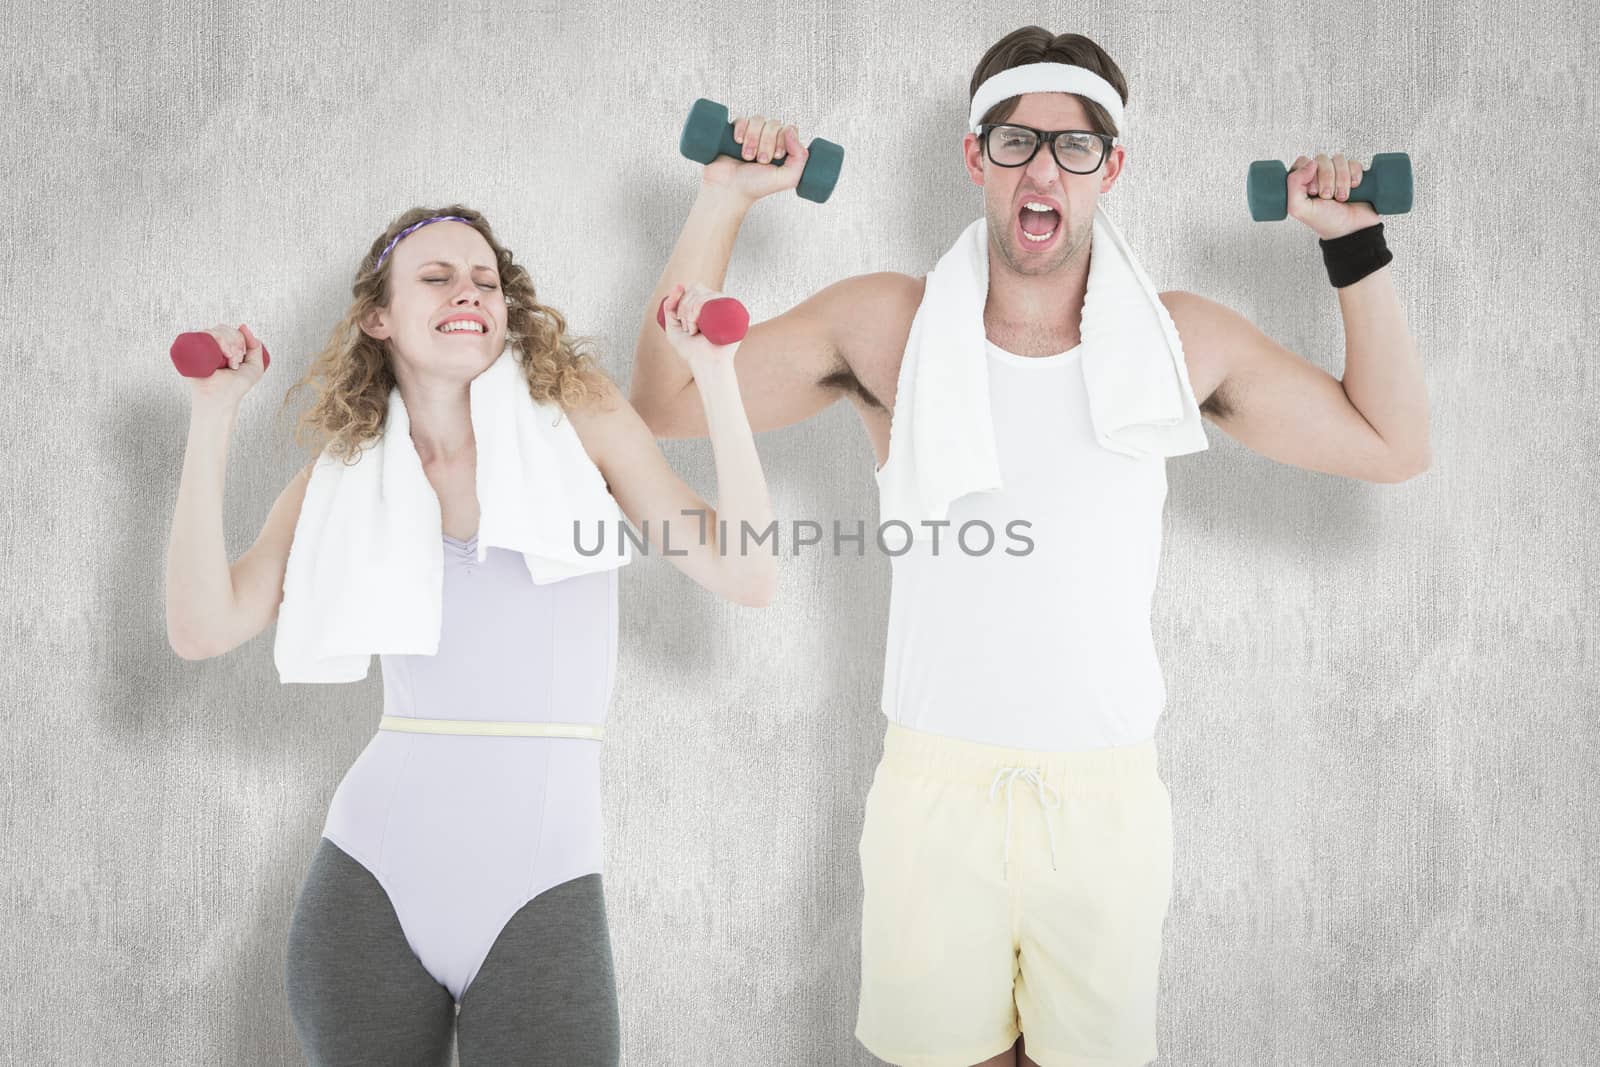 Geeky hipster couple lifting dumbbells in sportswear  against white background